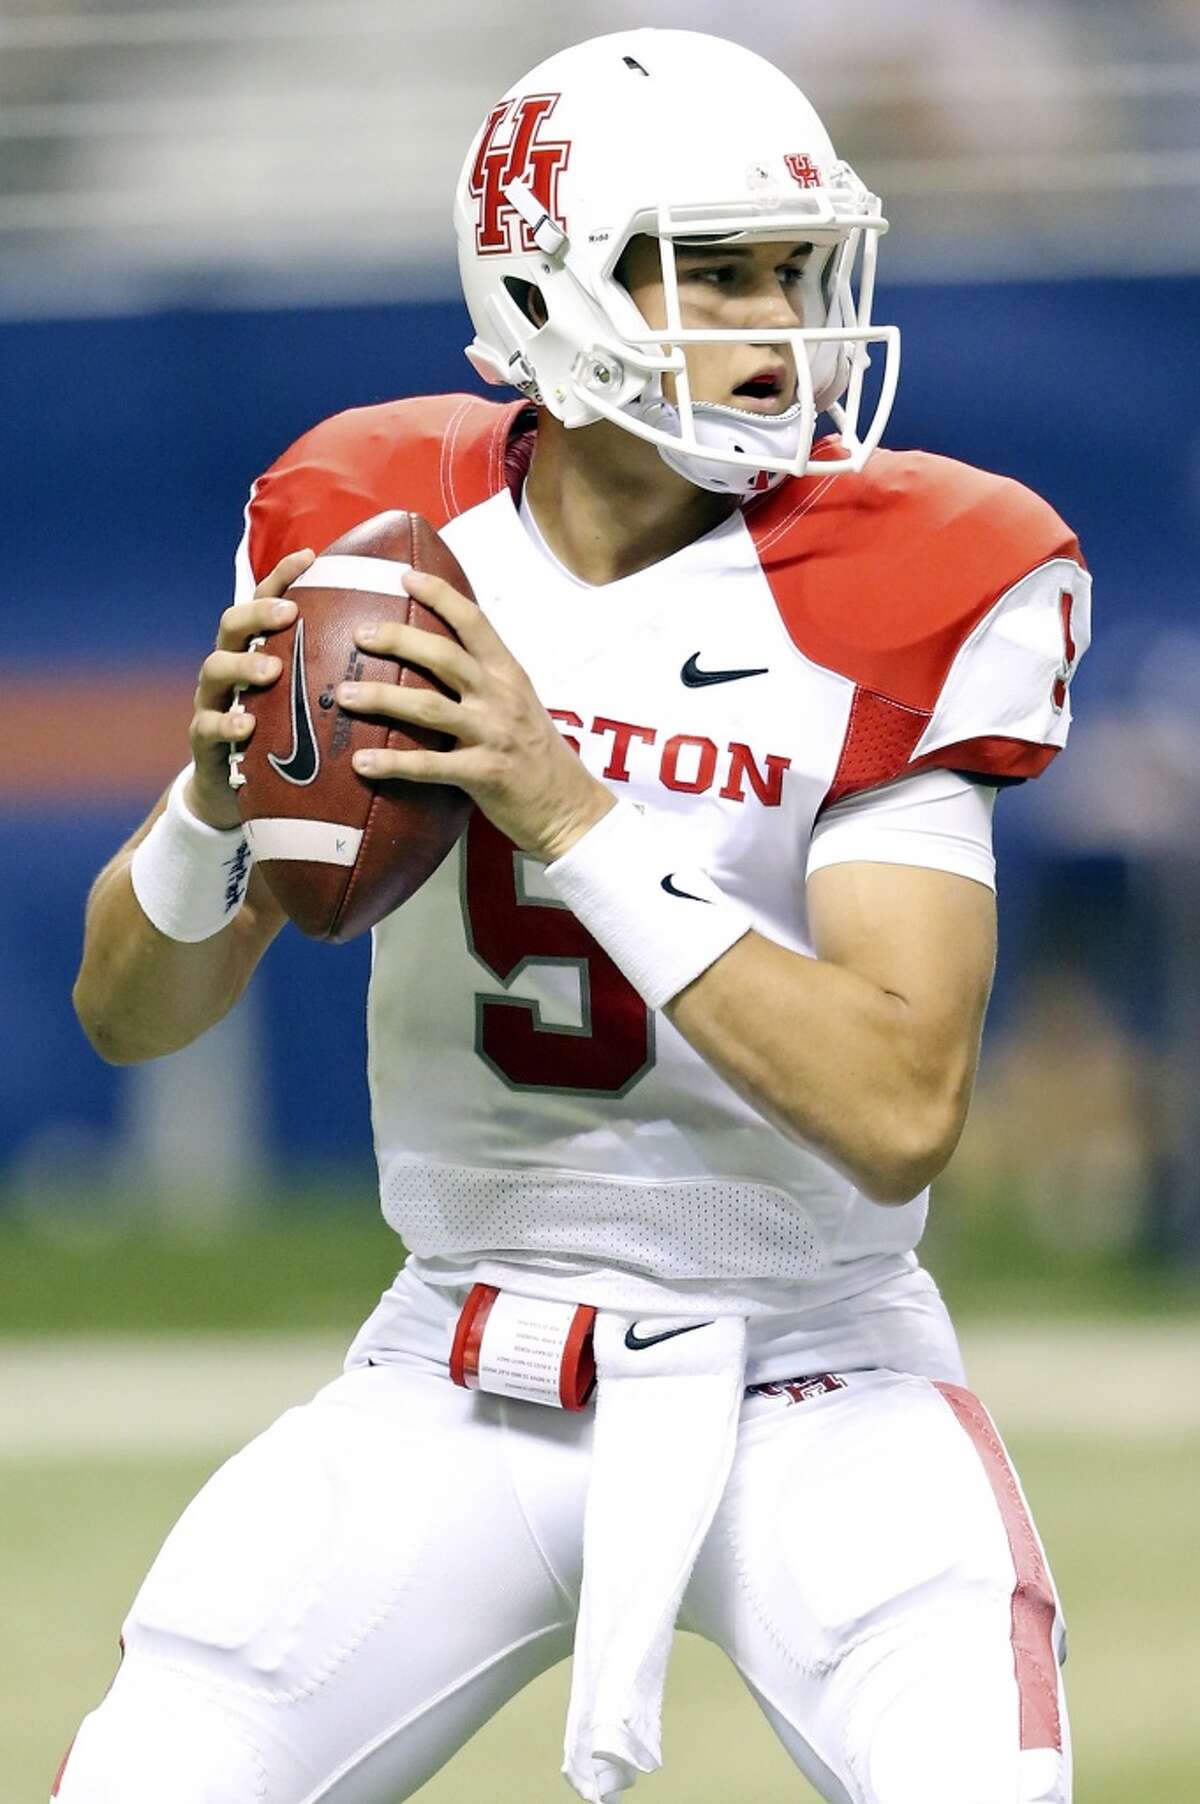 Newcomer of the year -- Houston quarterback John O'Korn. We didn't hear much from O'Korn during the regular season as the 19-year-old freshman was muzzled in a media gag order by his coach Tony Levine after taking over as the Cougars' starter for their third game of the season. O'Korn's solid performance enabled him to set school freshman records for touchdown passes (26) and completions (239). His 2,889 passing yards are only 243 yards from breaking Kevin Kolb's school freshman record heading into UH's Jan. 4 BBVA Compass Bowl appearance against Vanderbilt.